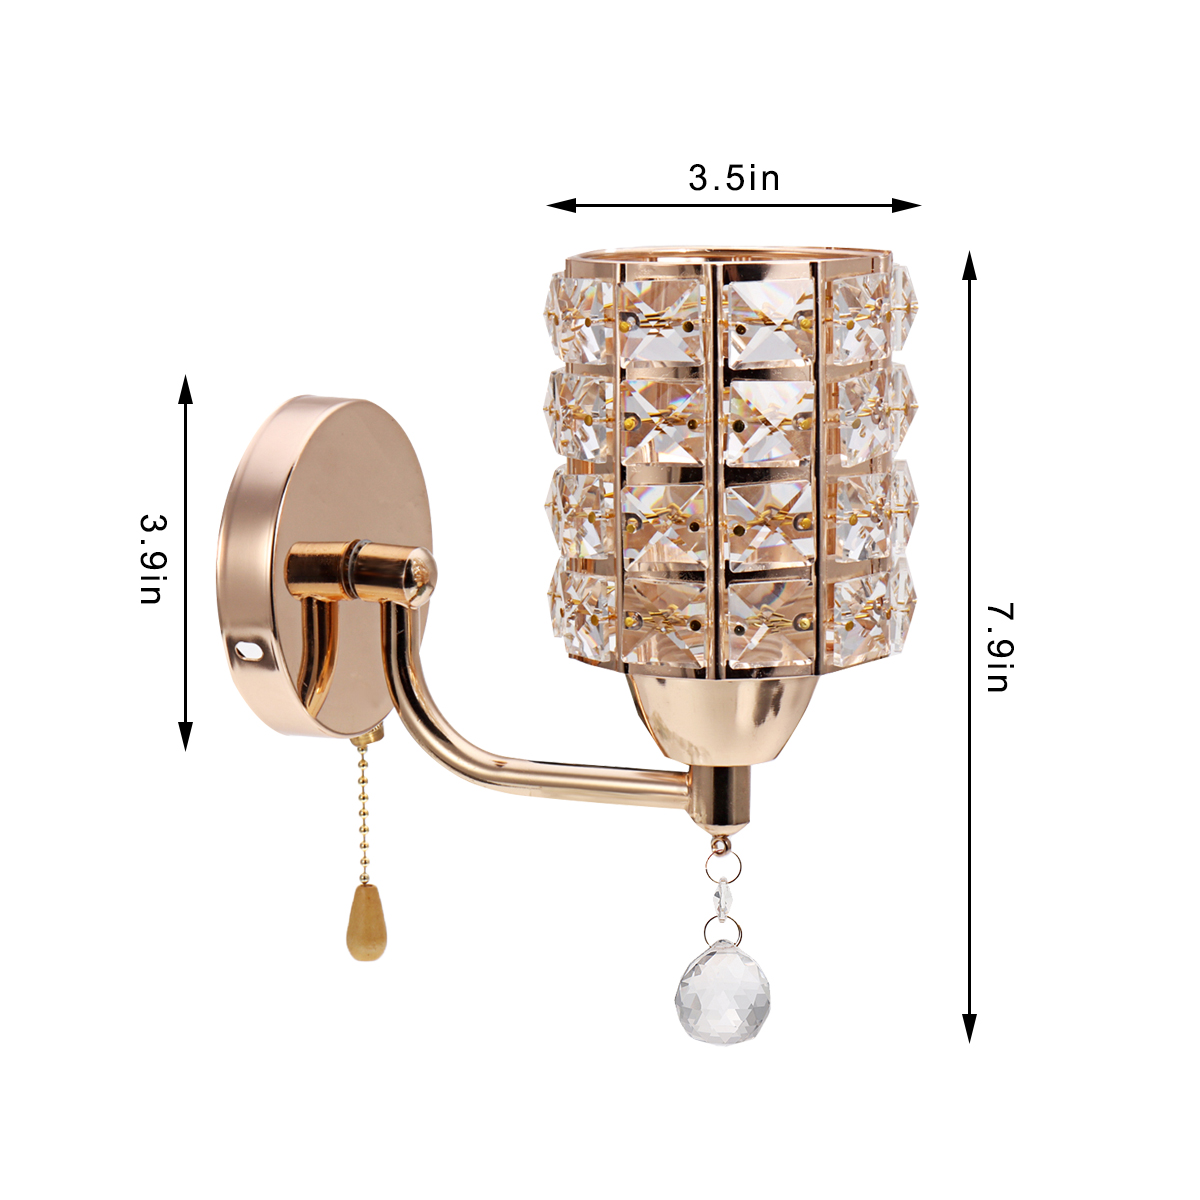 AC85-265V-Luxury-Crystal-Wall-Light-Modern-E27-Bedroom-Aisle-Sconce-Lighting-Lamp-Fixtures-Without-B-1794630-4